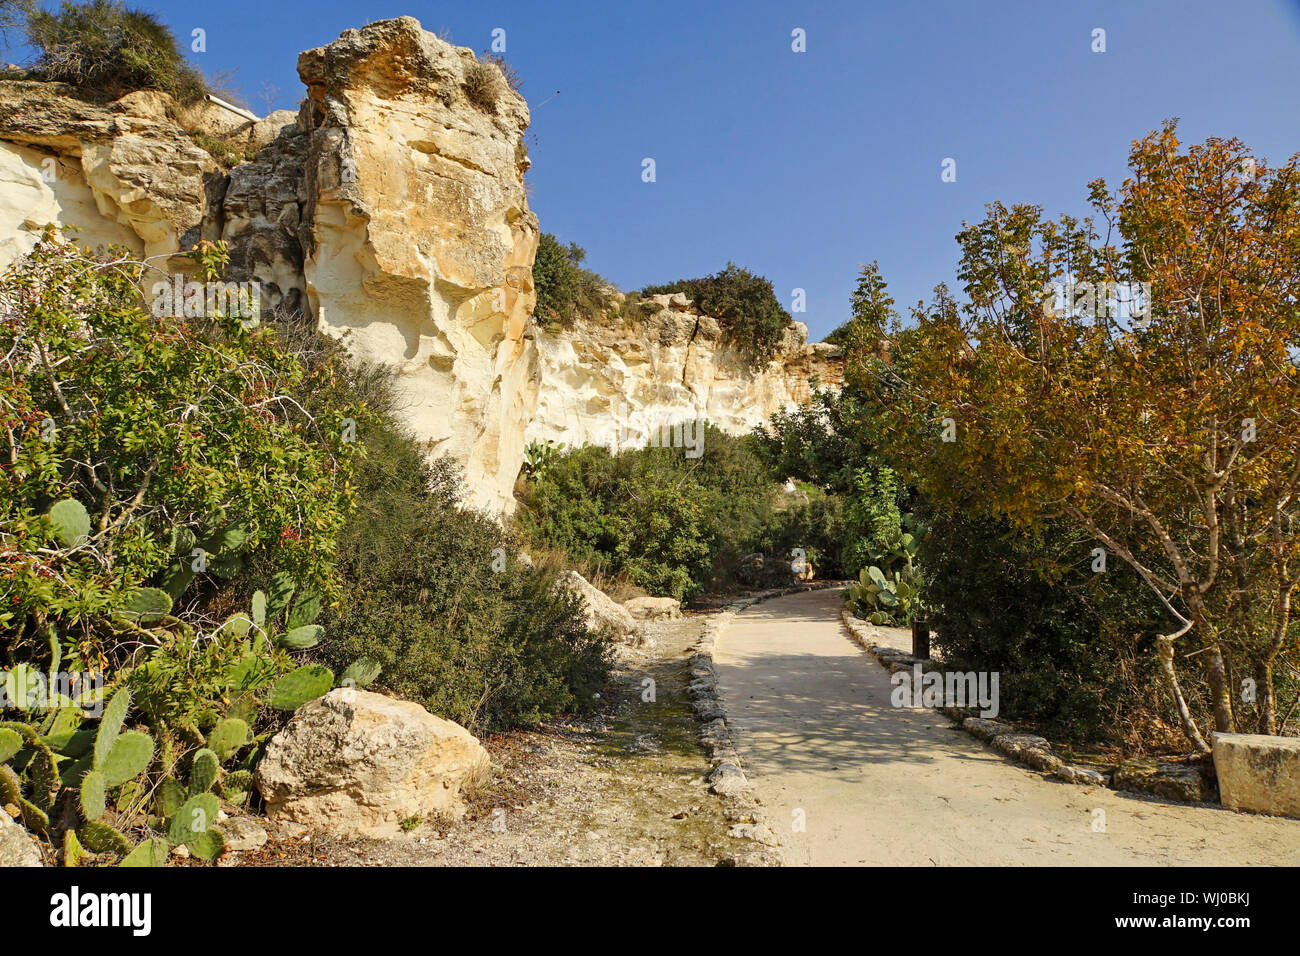 Entrance to a Bell cave at Beit Guvrin National Park. Beit Guvrin-Maresha National Park is a national park in central Israel, 13 kilometers from Kirya Stock Photo